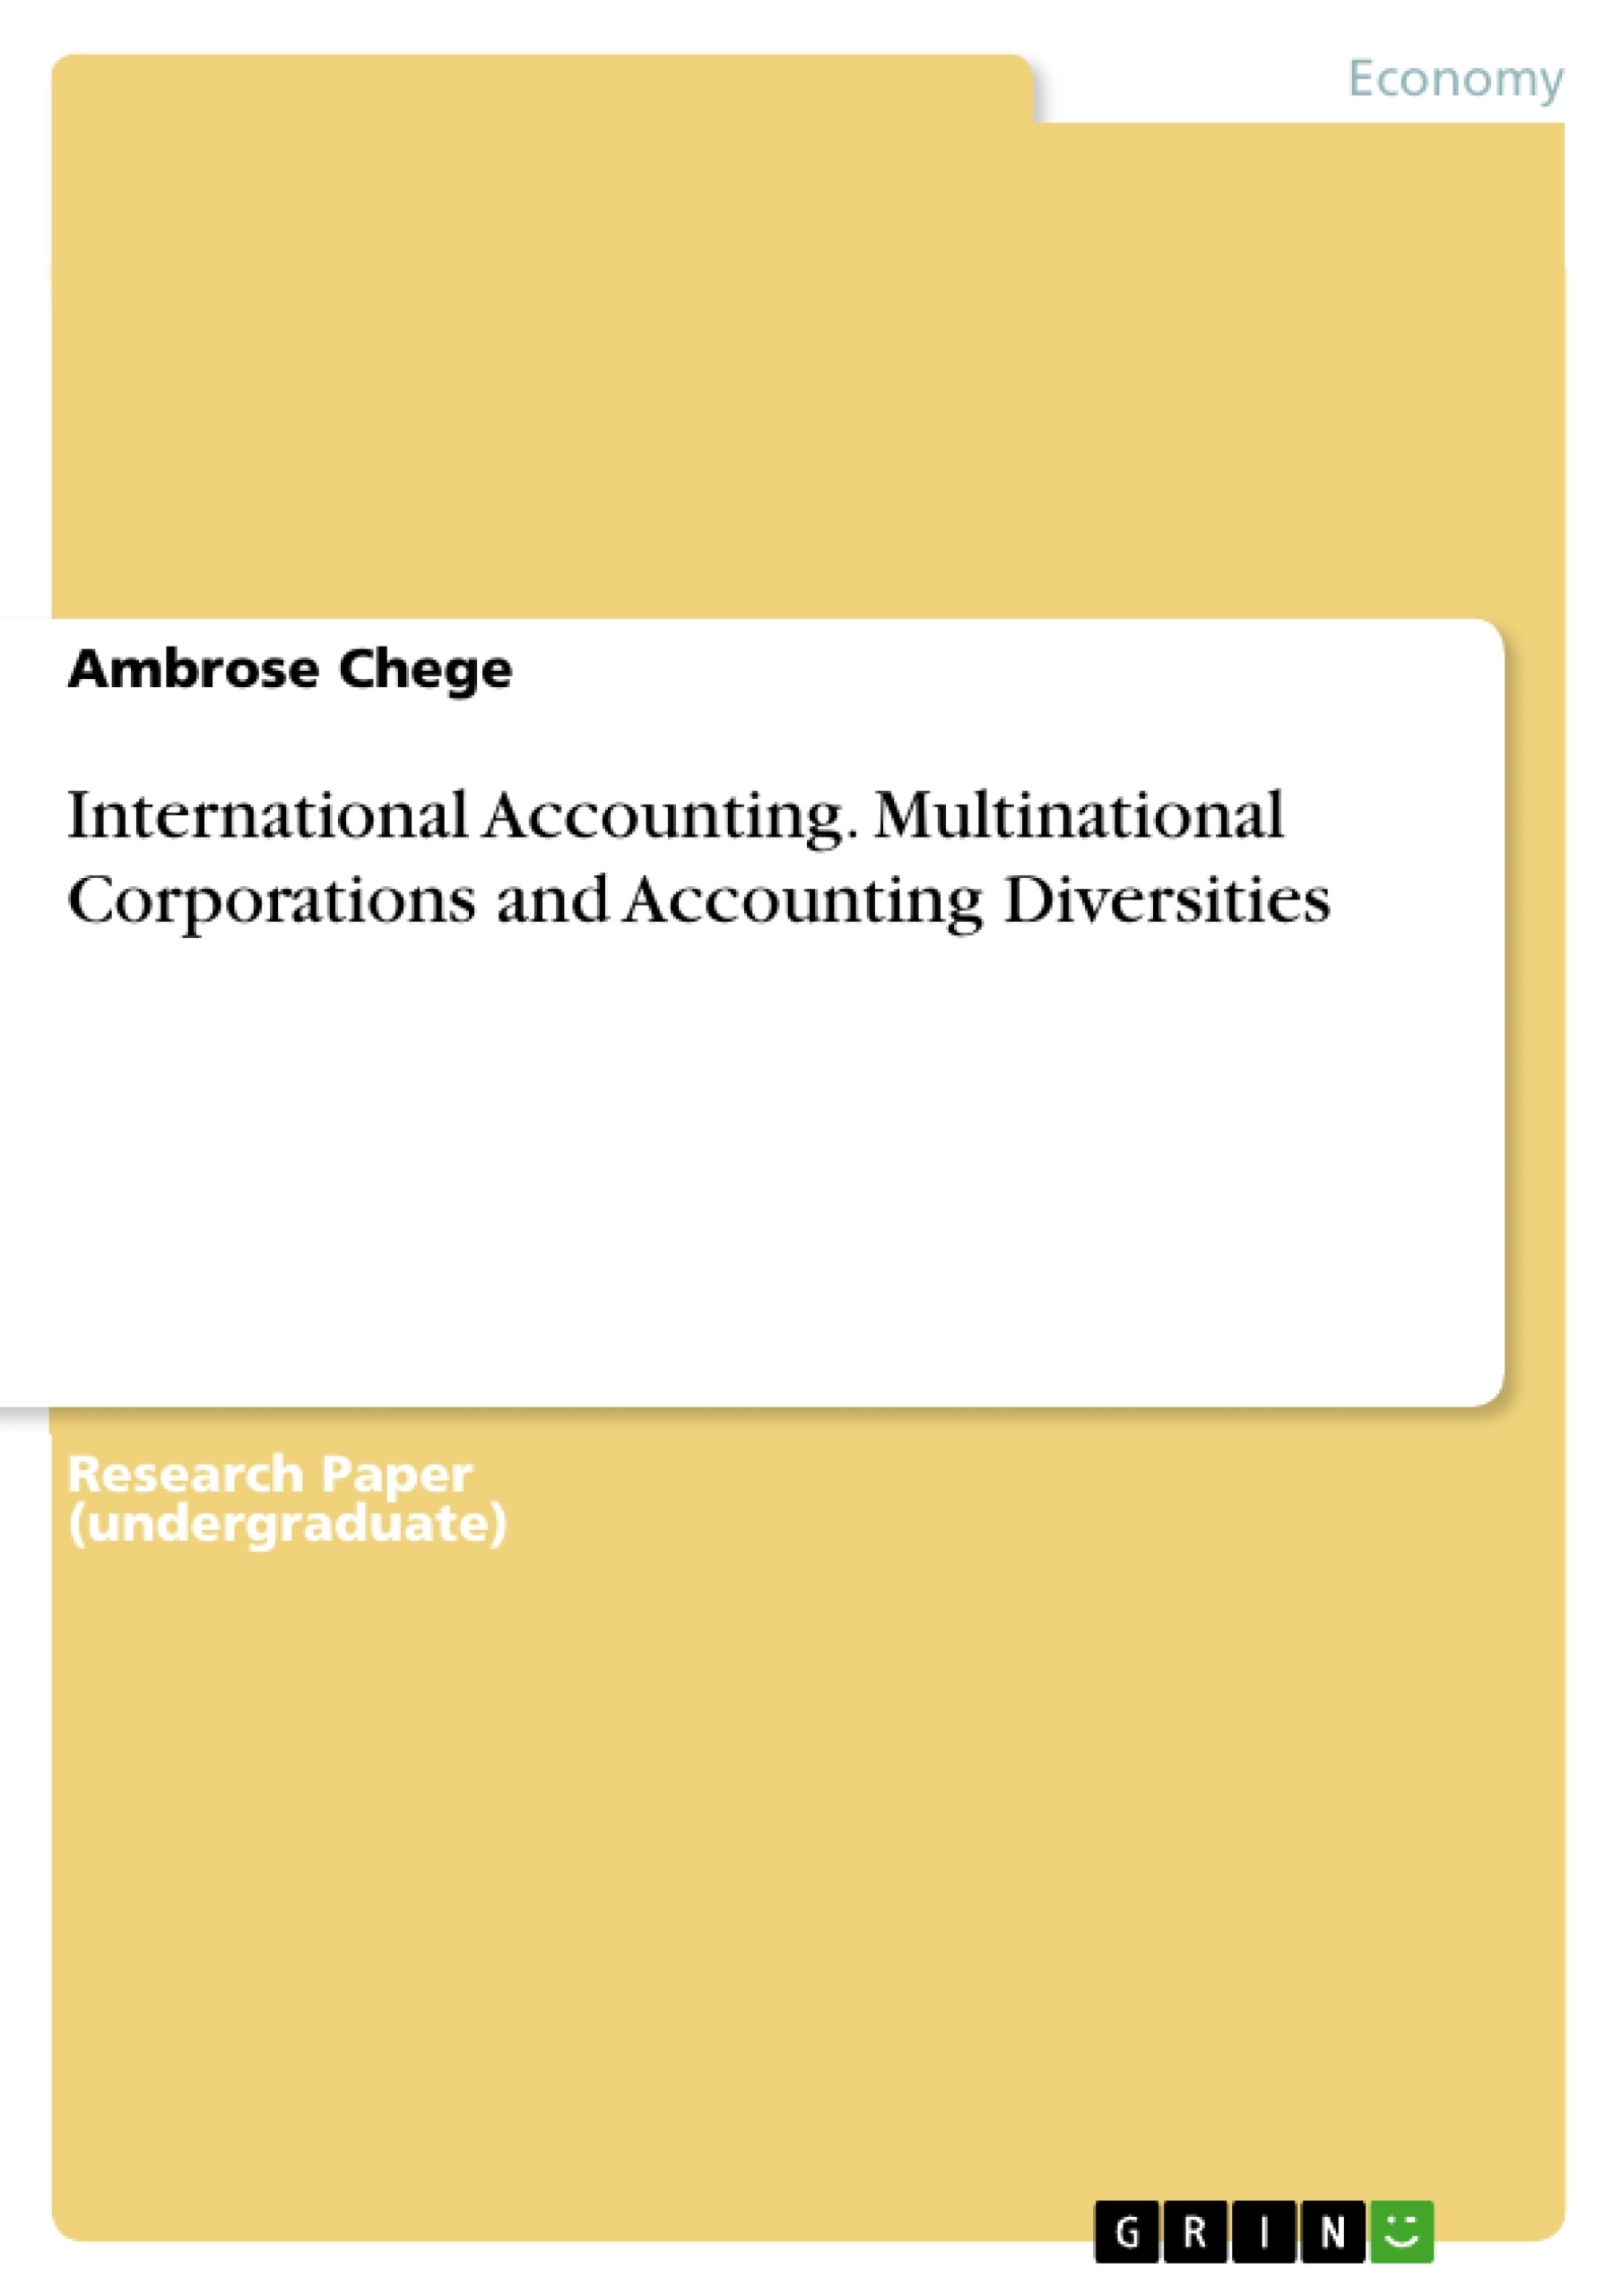 Title: International Accounting. Multinational Corporations and Accounting Diversities